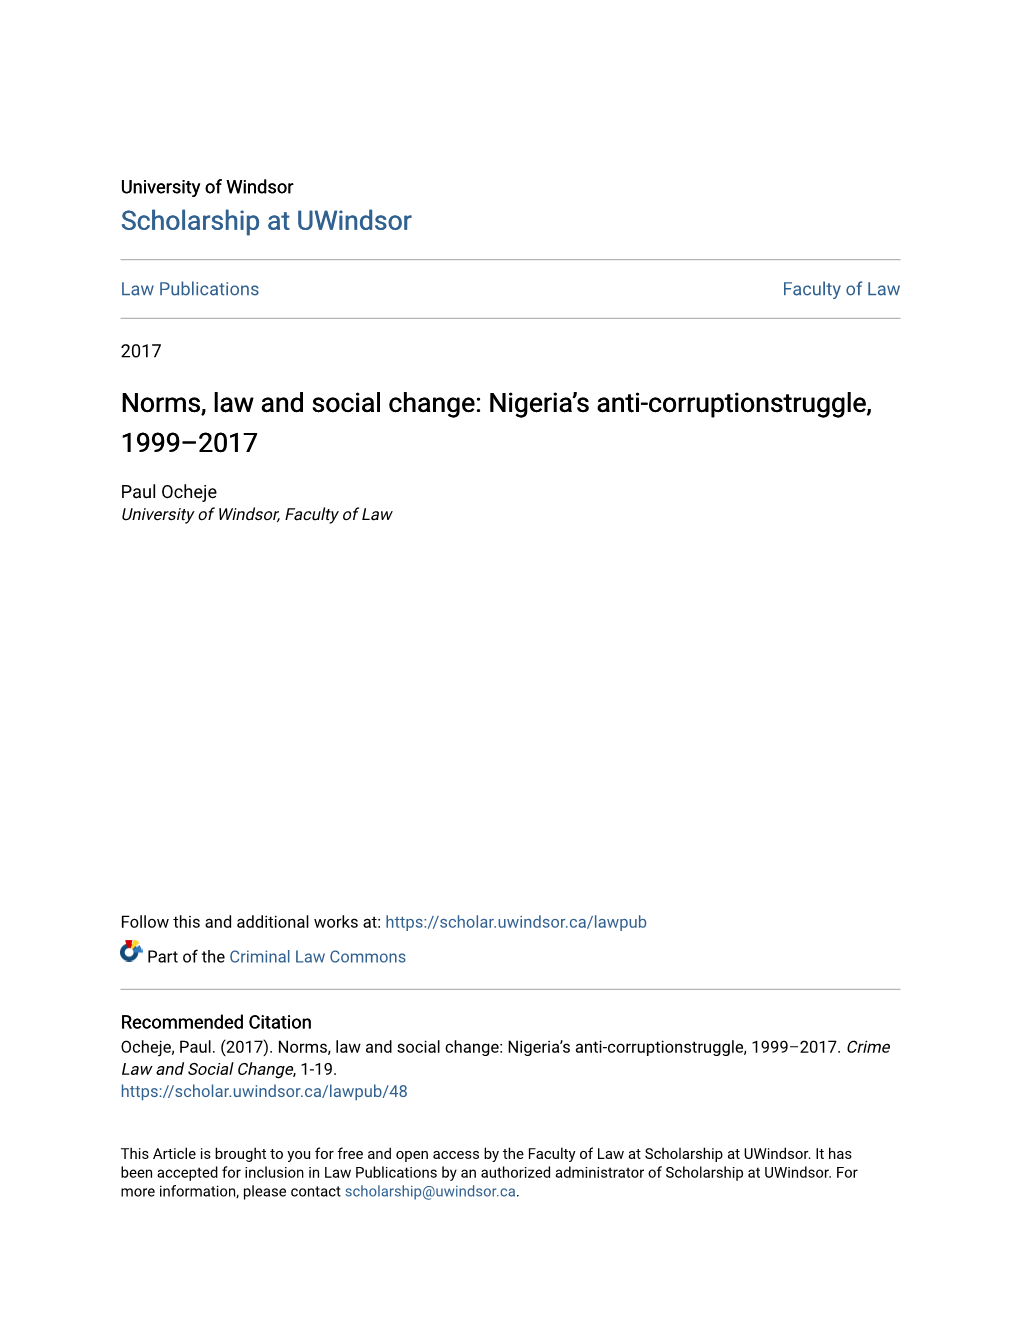 Norms, Law and Social Change: Nigeria’S Anti-Corruptionstruggle, 1999–2017